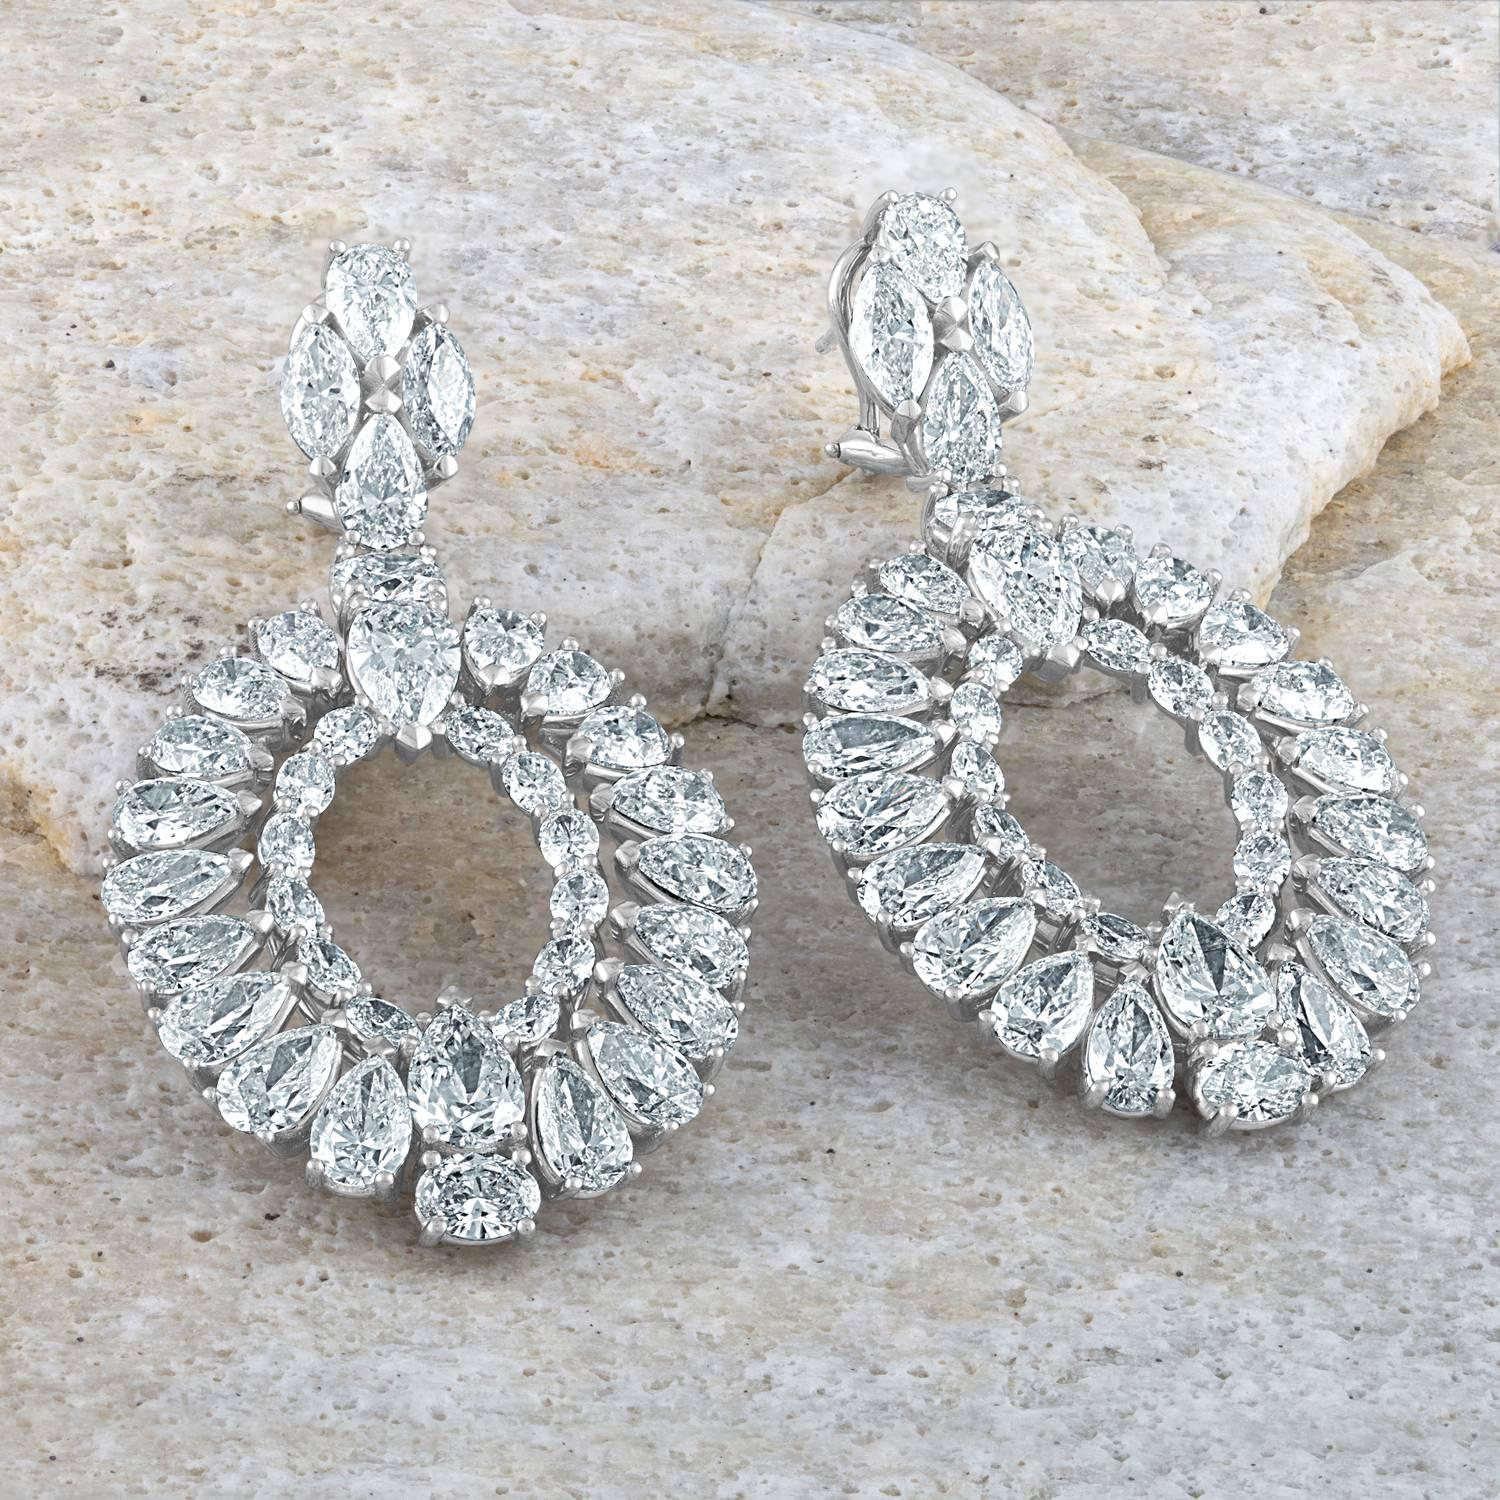 Platinum Earrings with 31.27 Carat of Fancy Shapes Diamonds 3